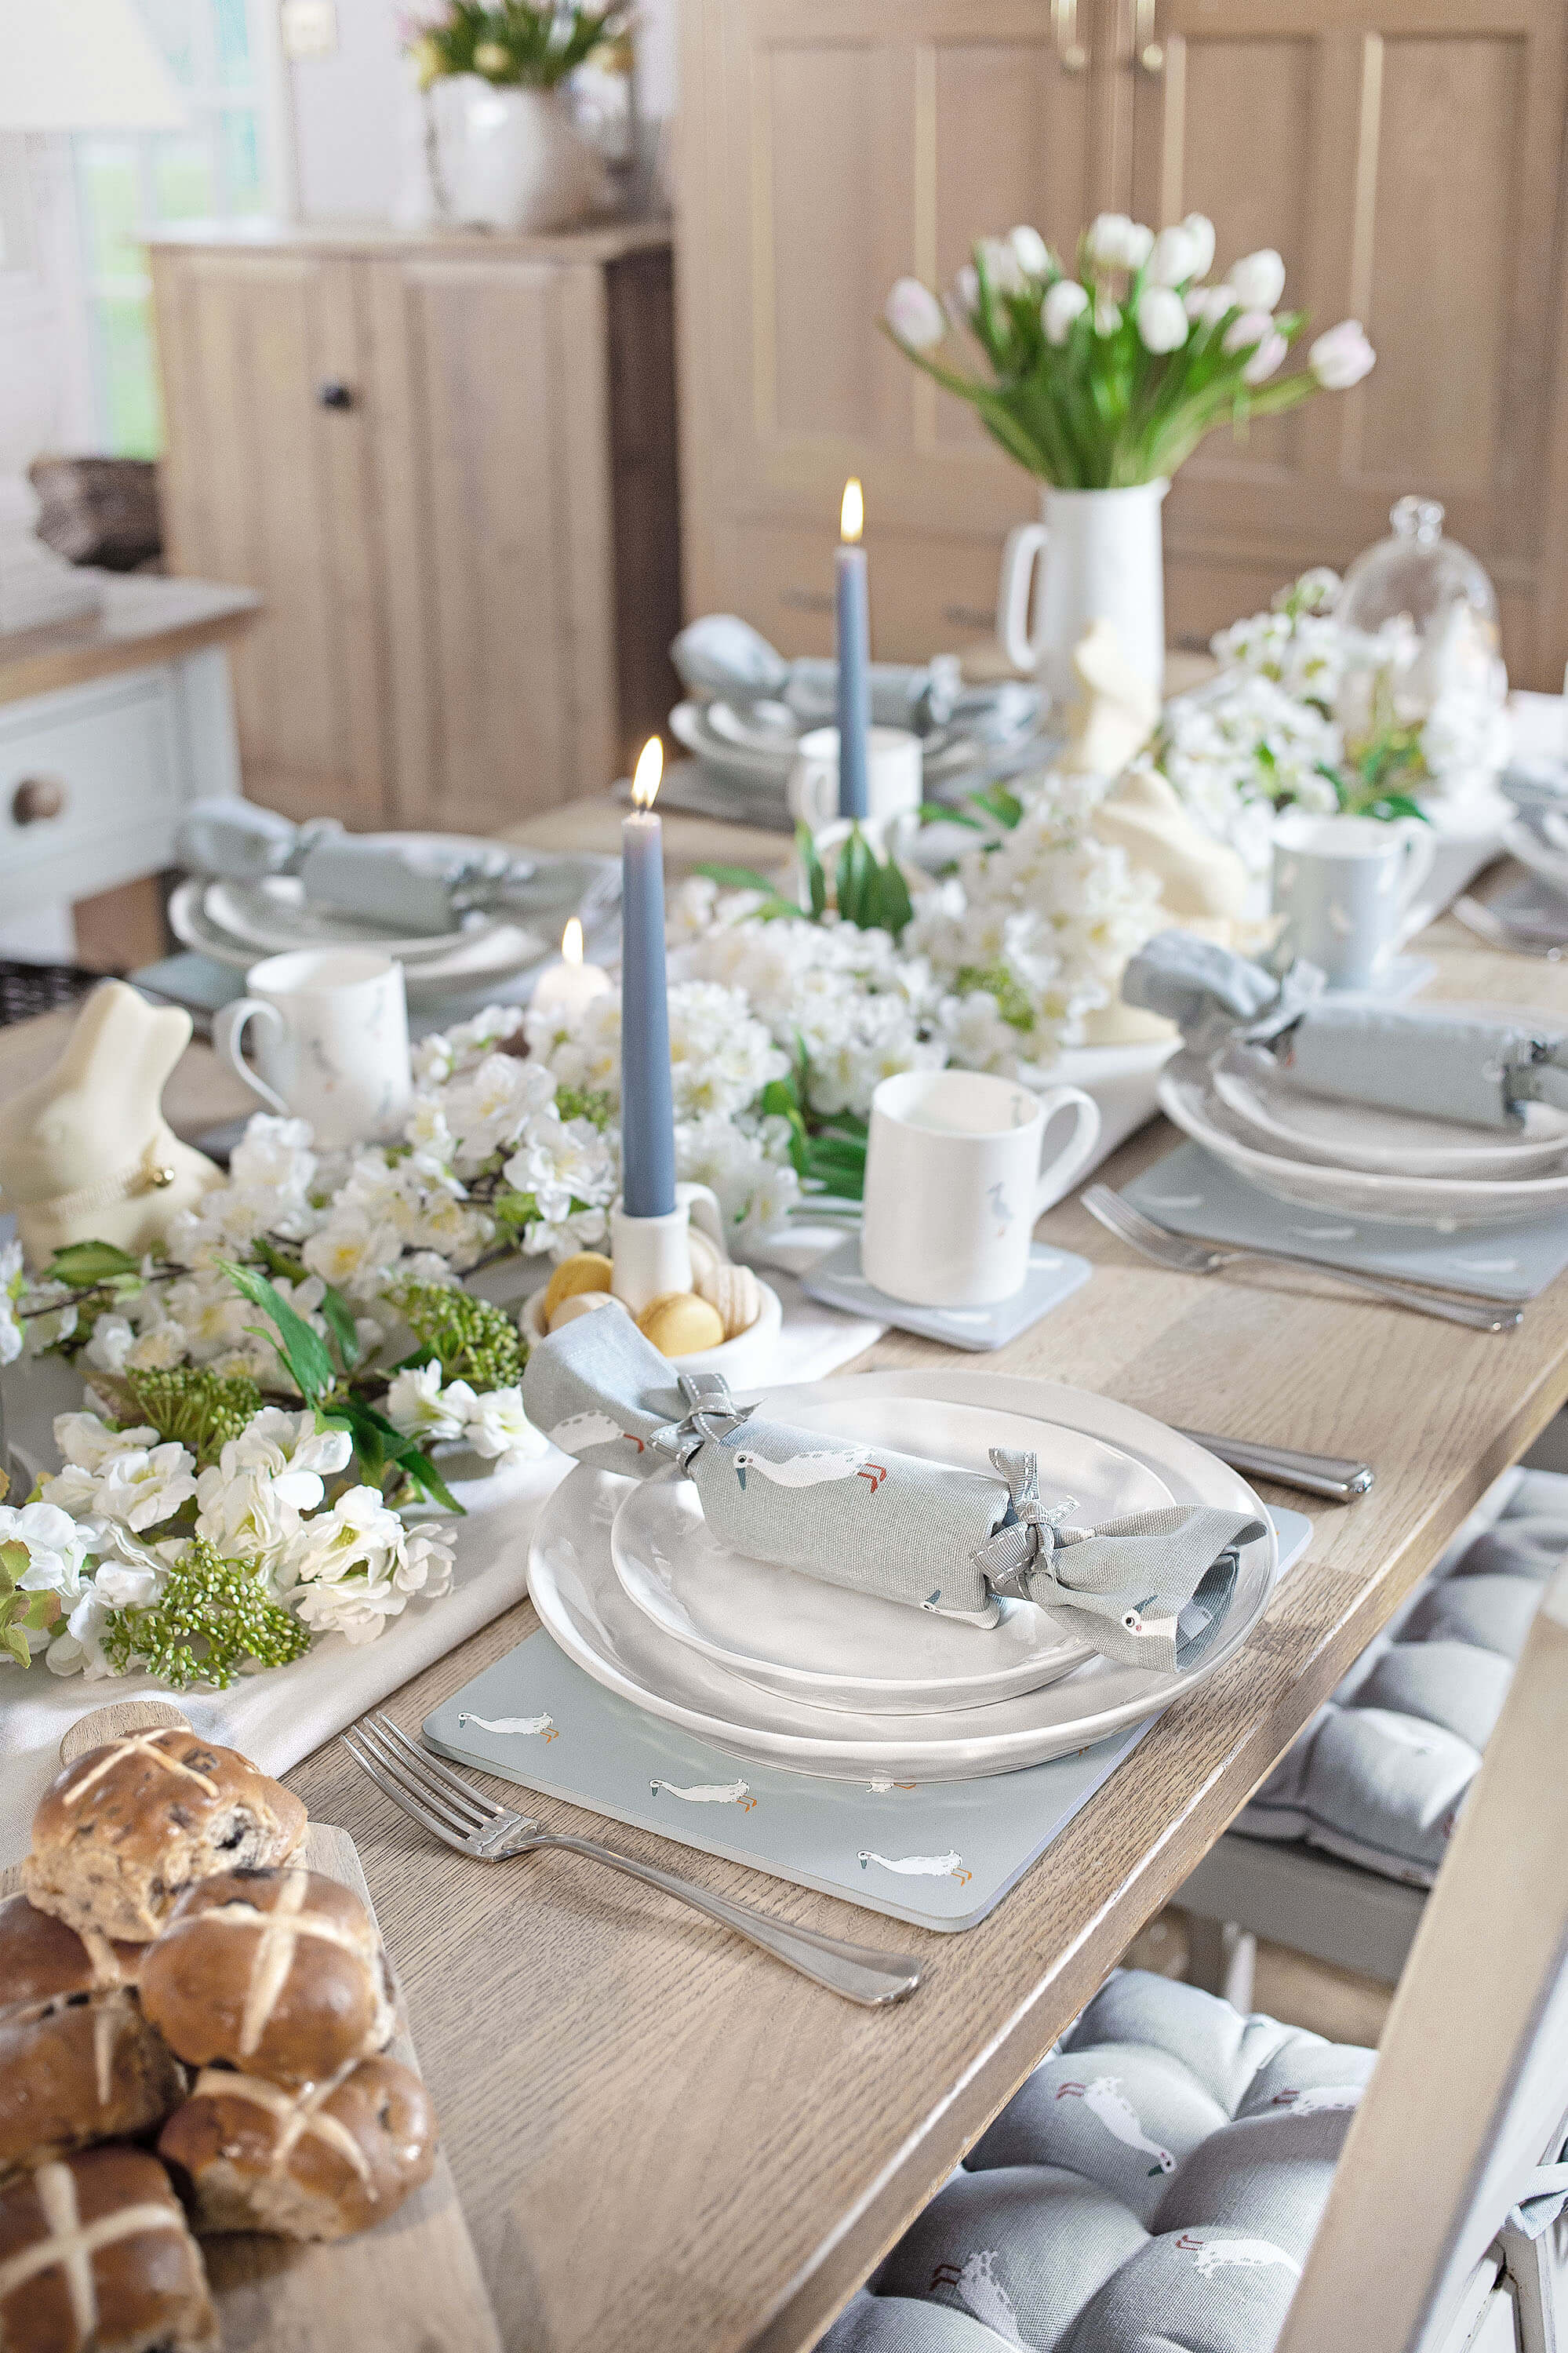 Spring Table Setting using Sophie Allport's Spring Designs 